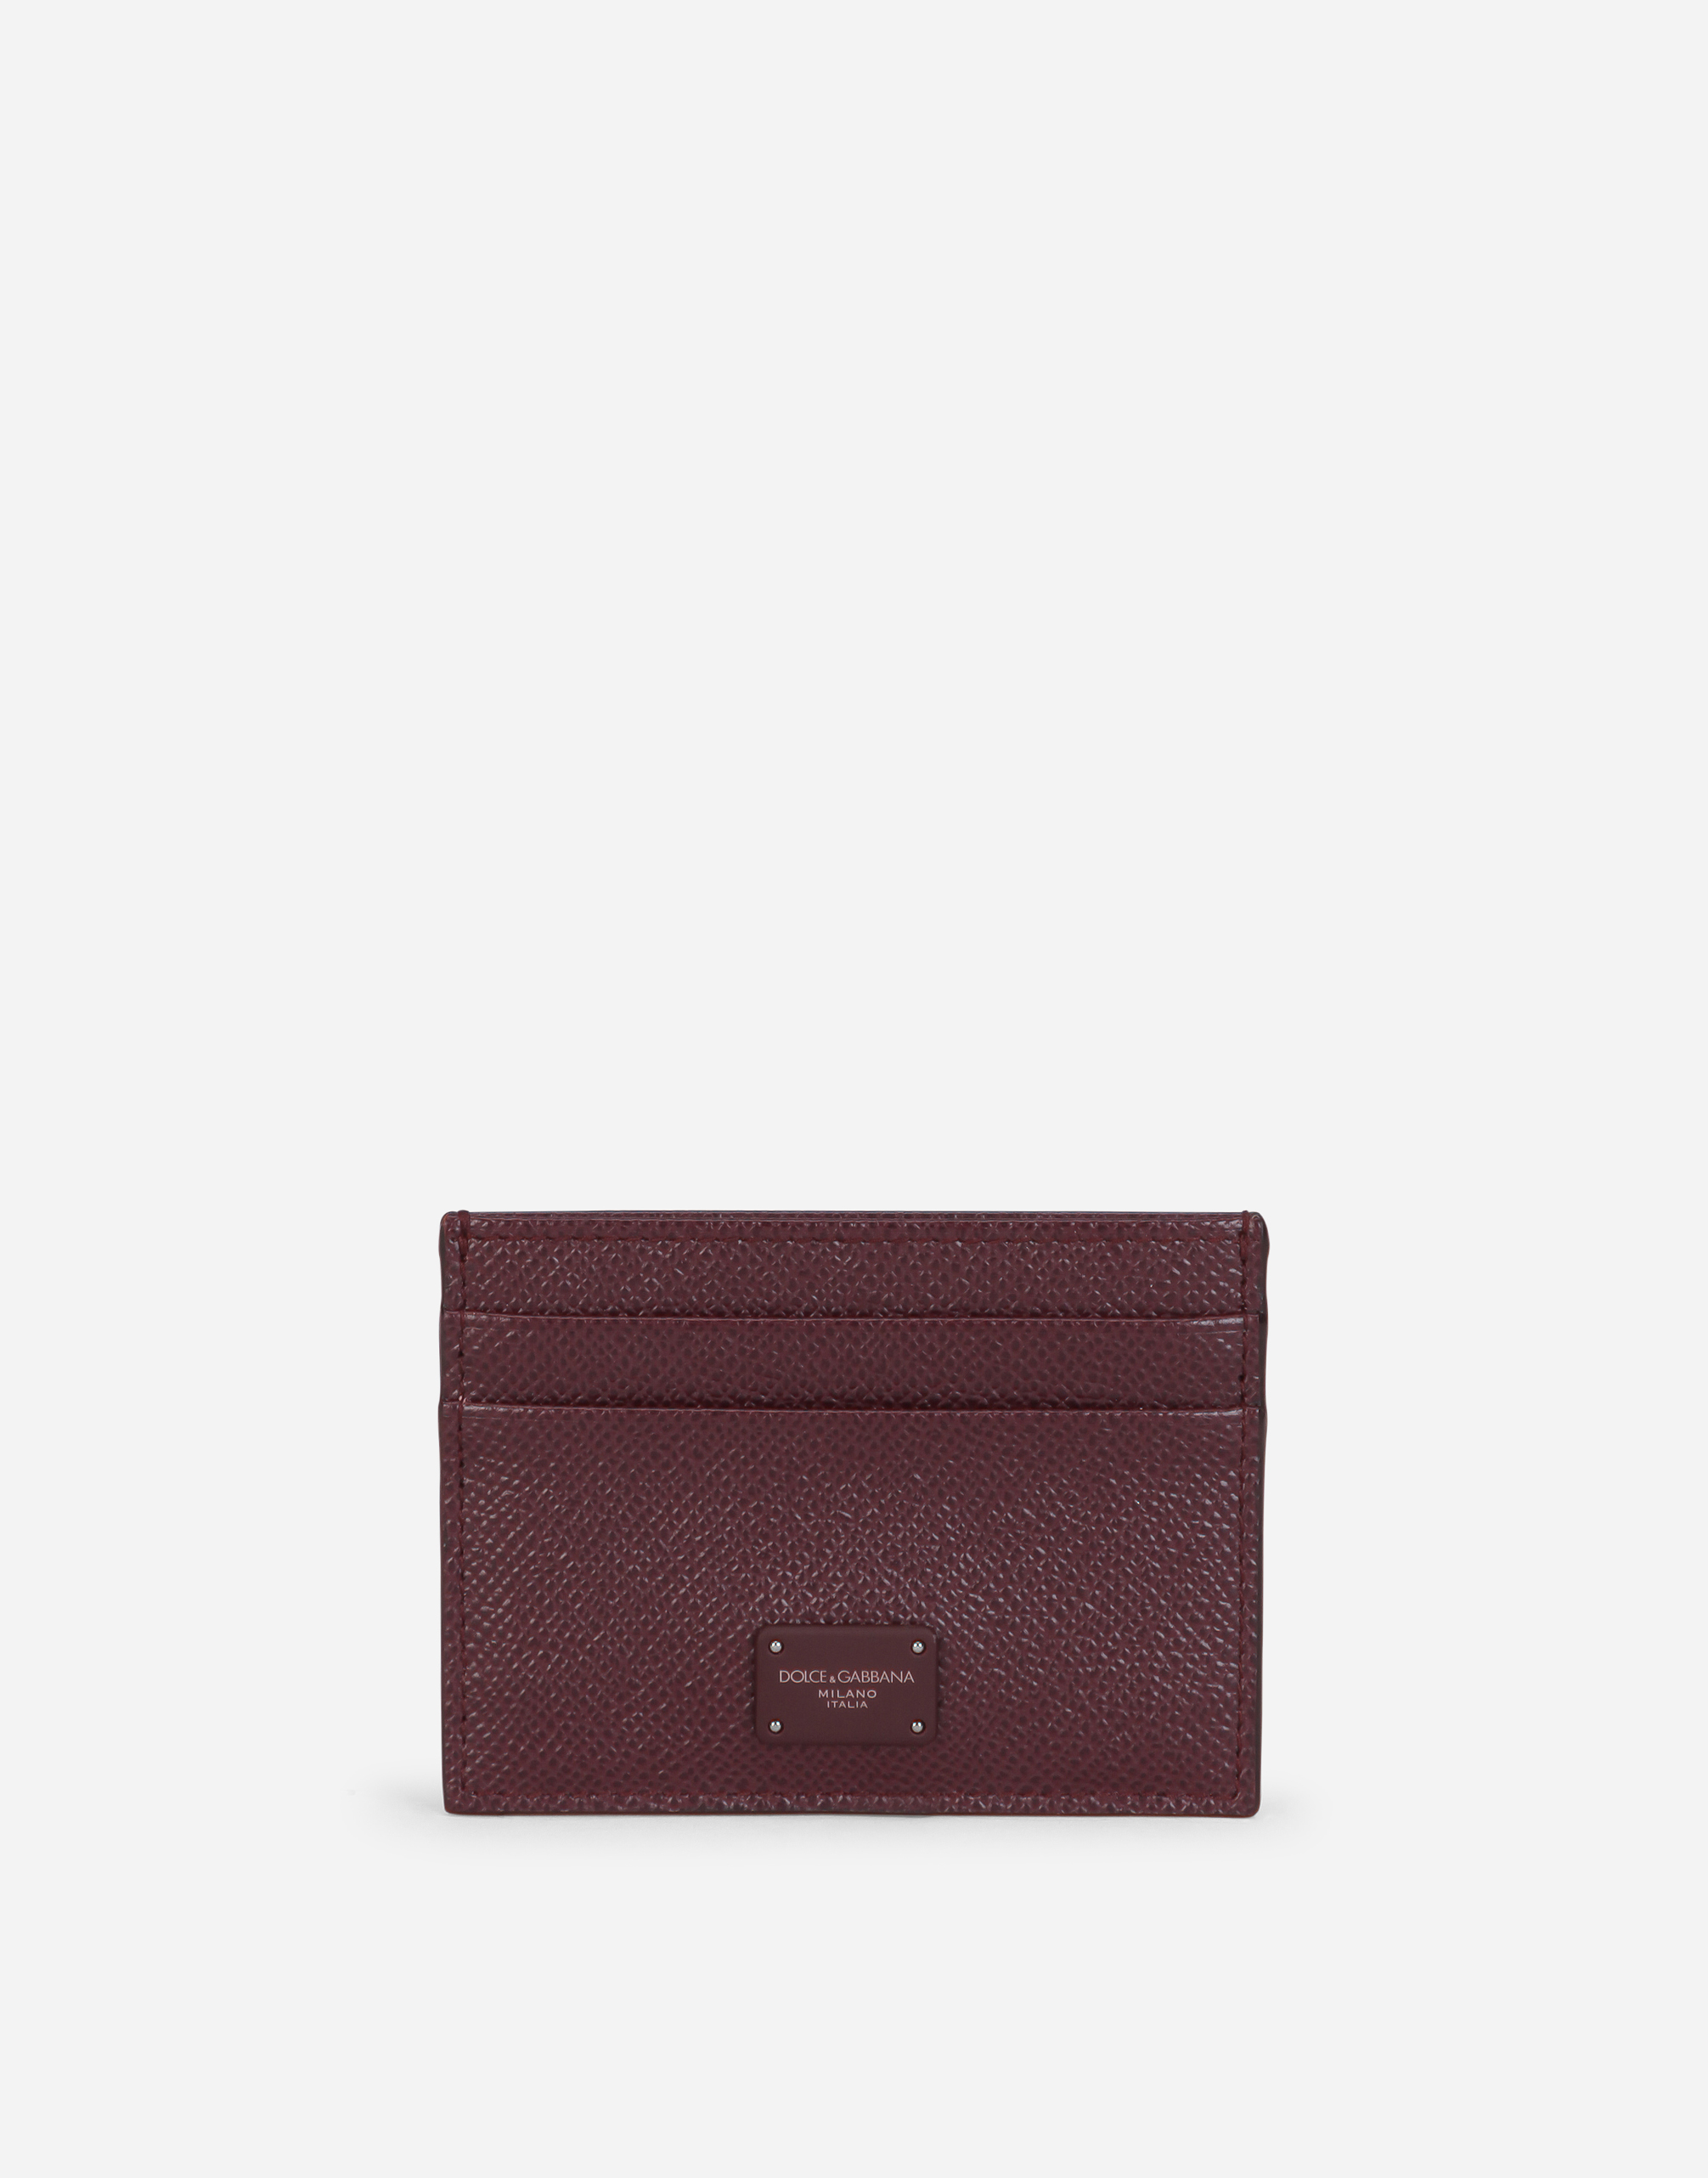 Dolce & Gabbana Dauphine Calfskin Card Holder With Branded Tag In Bordeaux